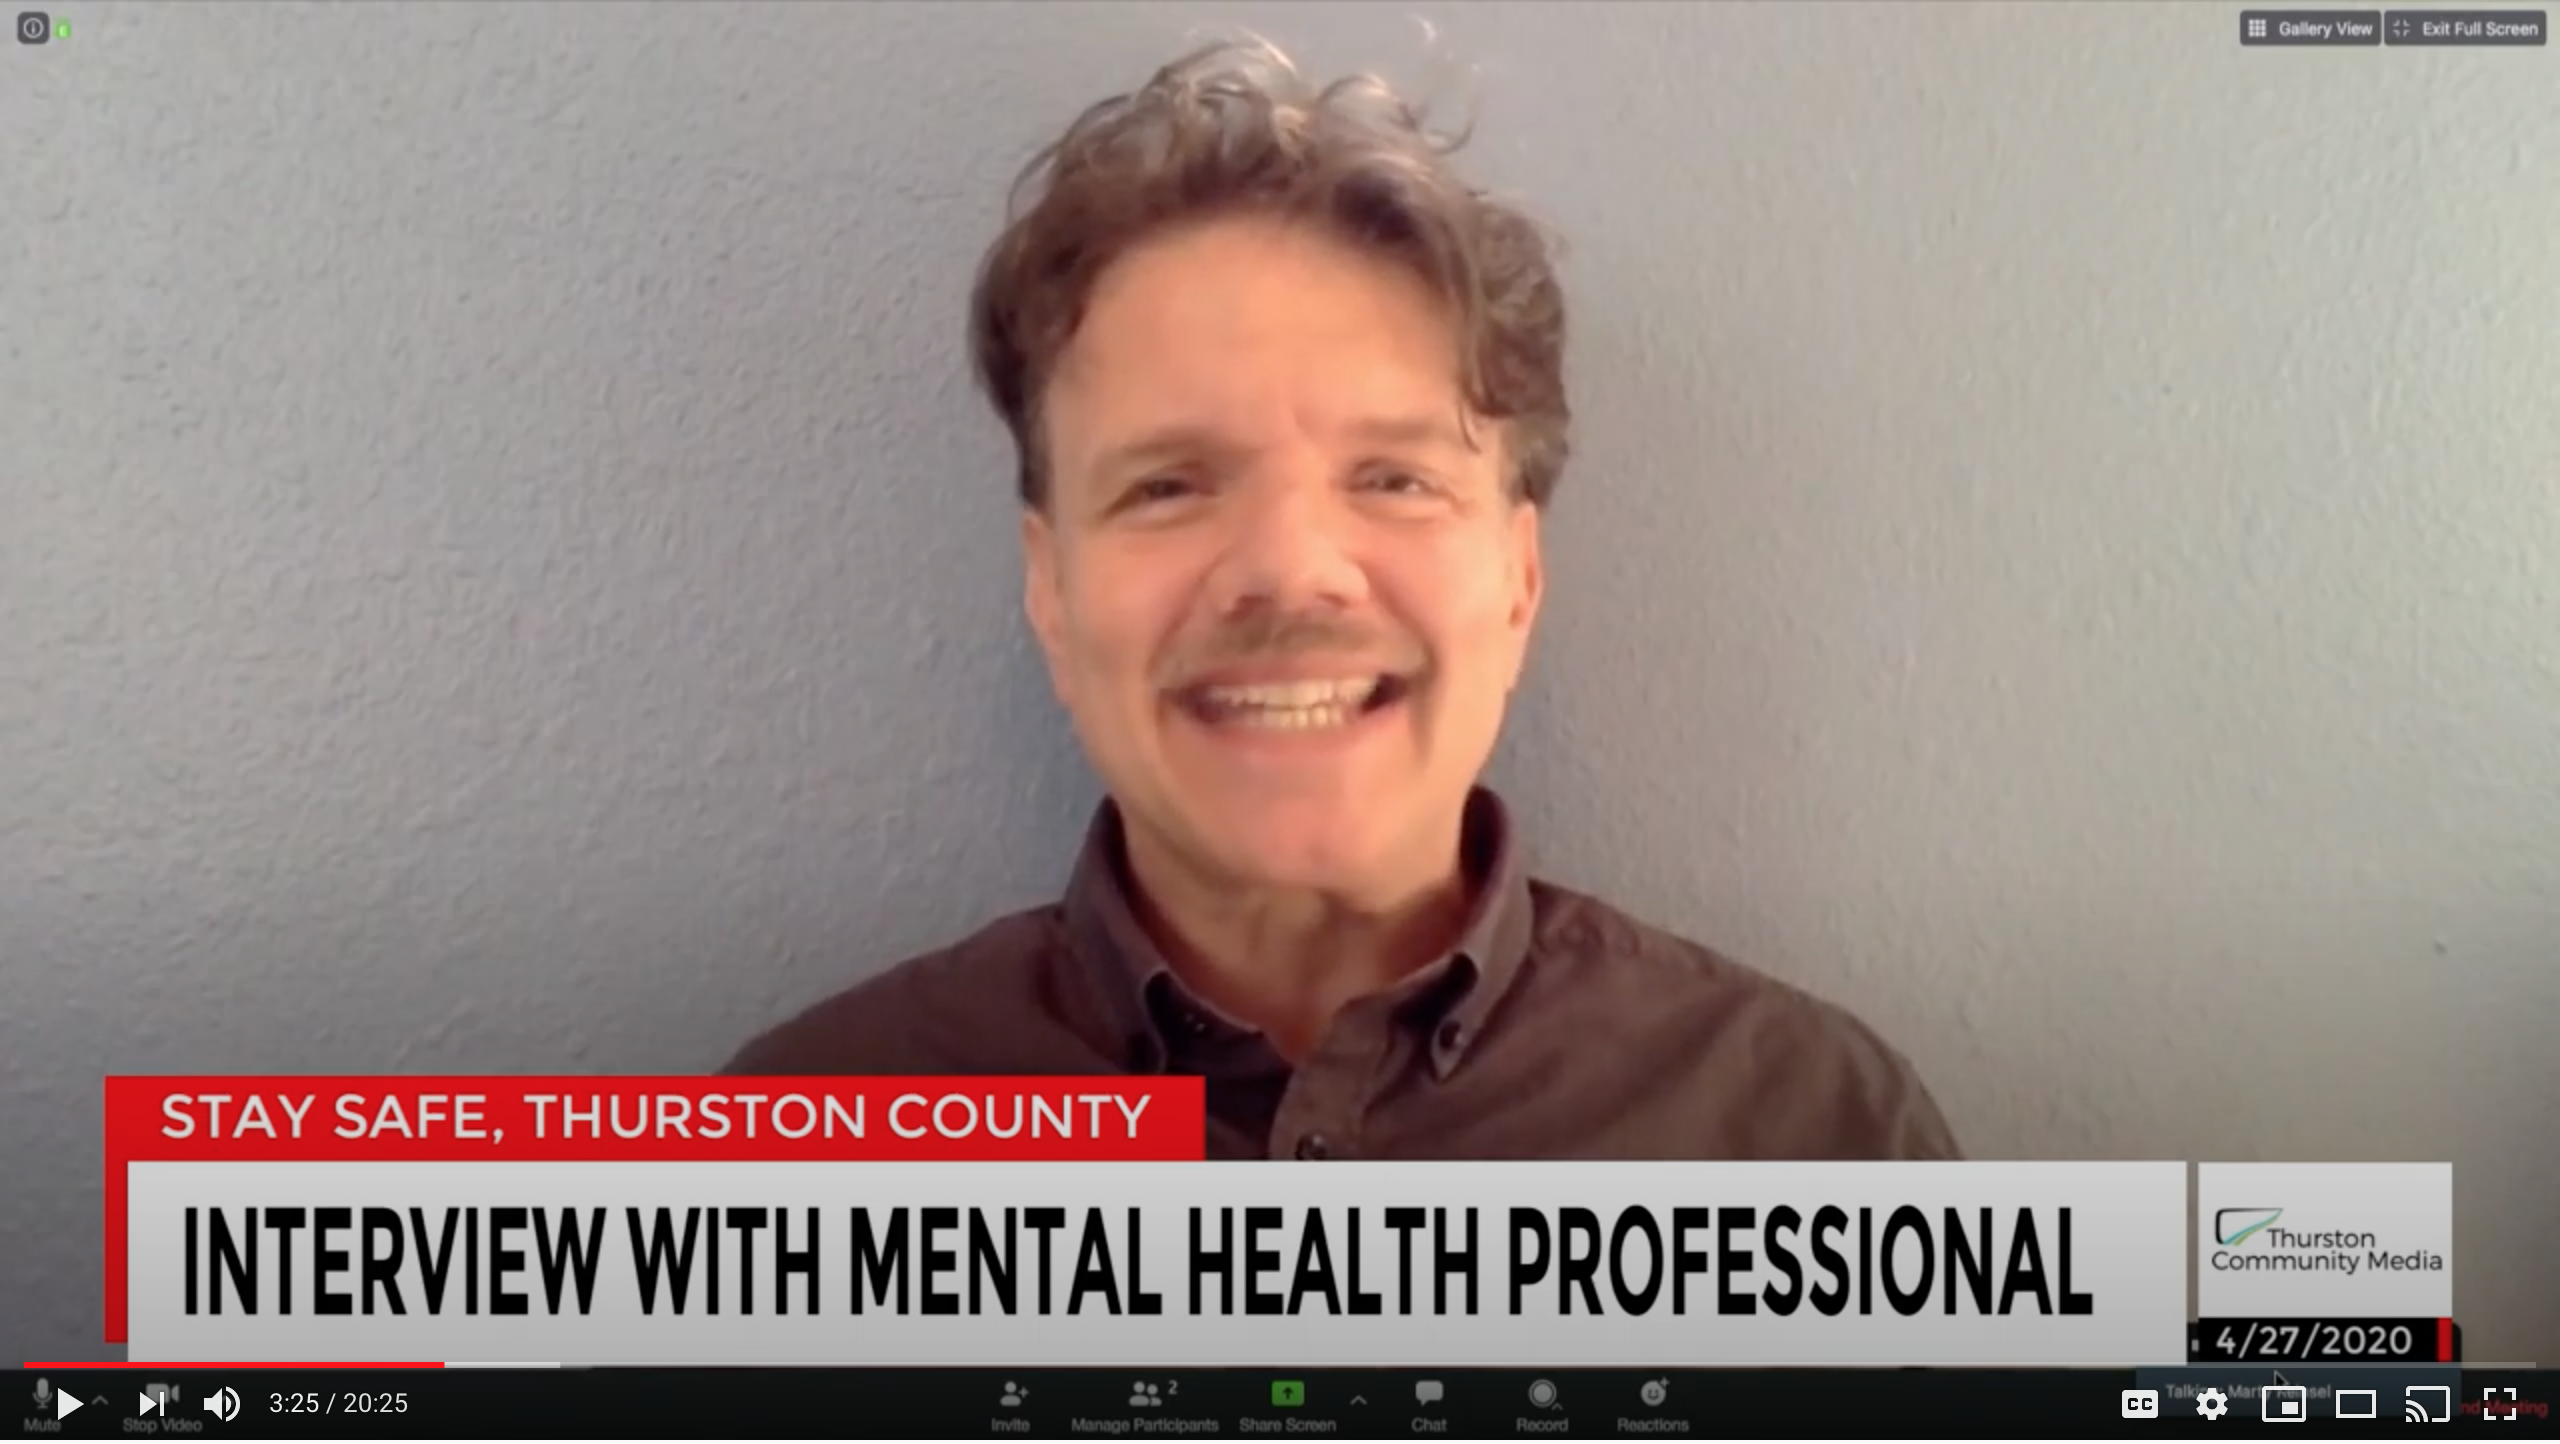 Interview with Mental Health Professional